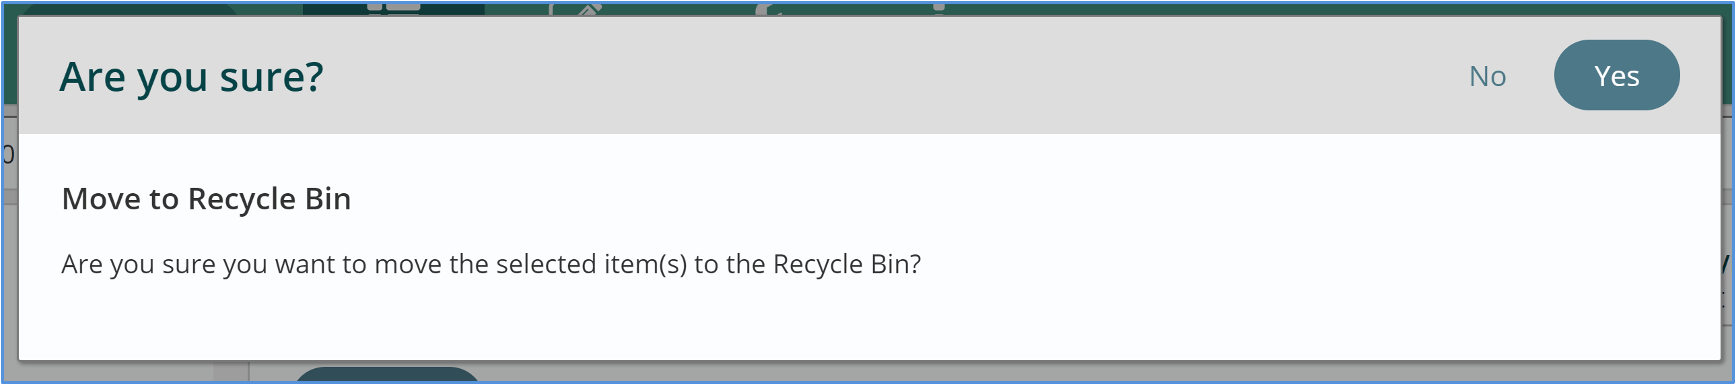 move to recycle bin are you sure